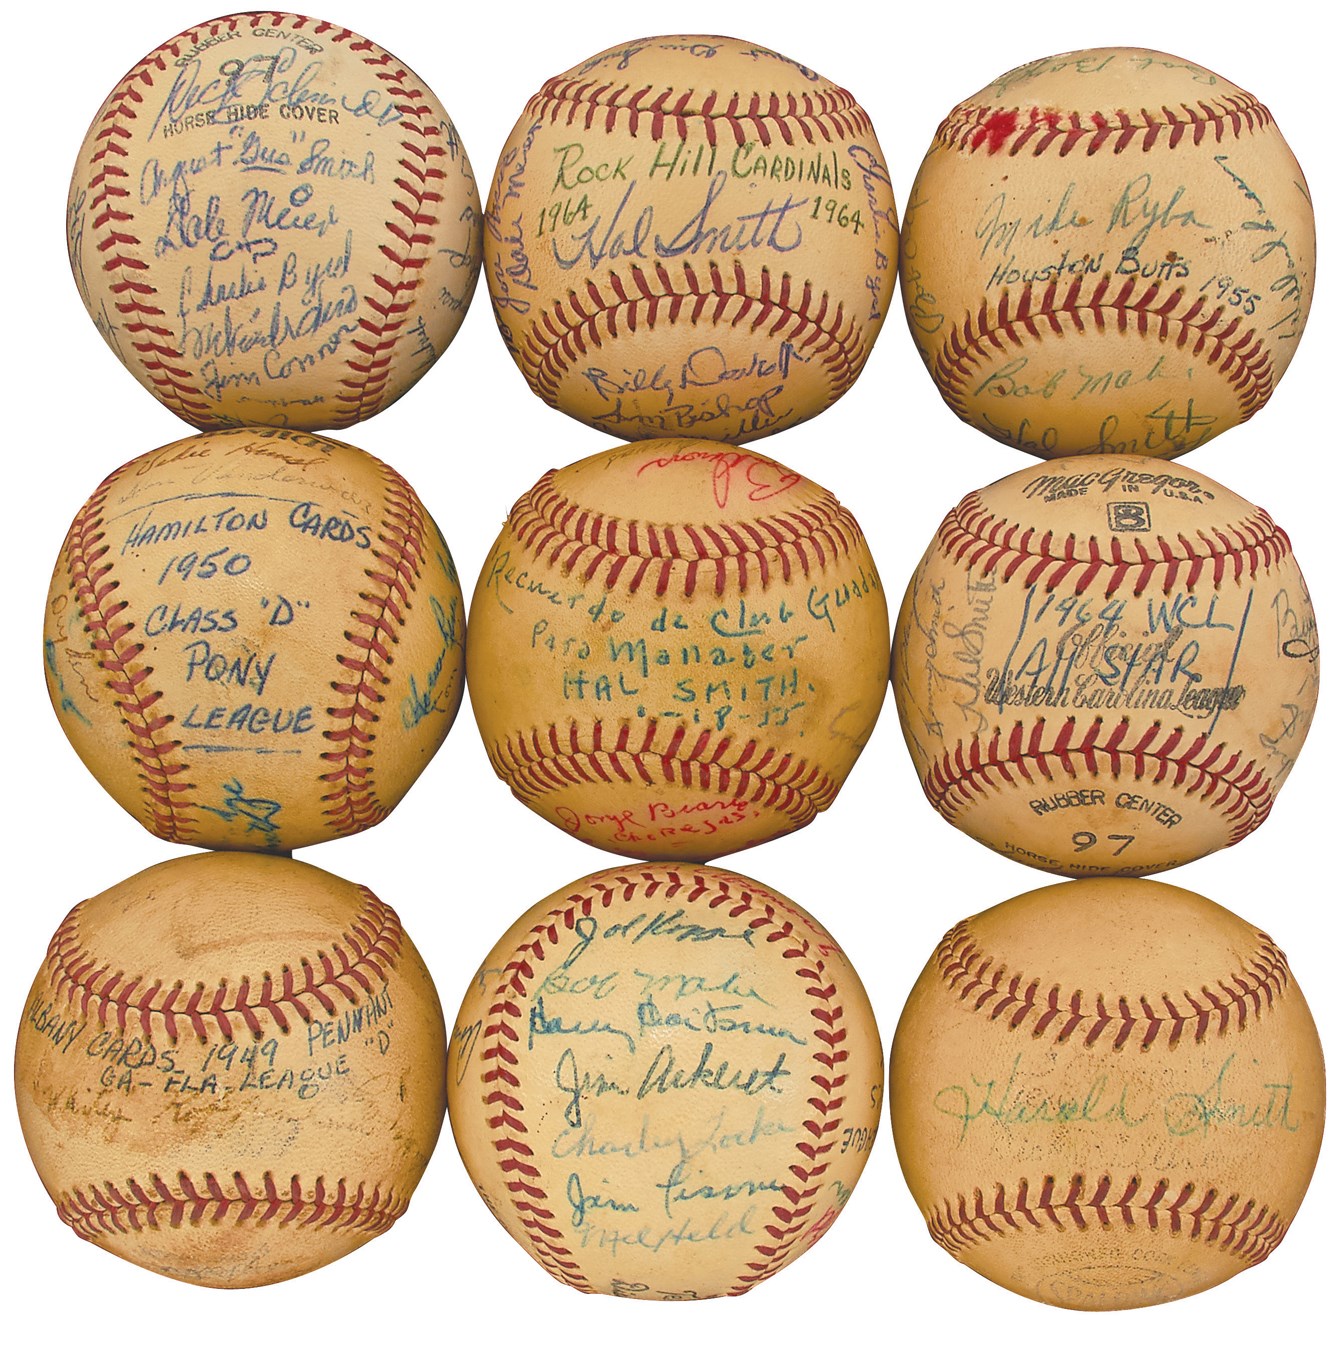 St. Louis Cardinals - Rare Minors & Mexican League Team-Signed Baseballs from MLer Hal R. Smith (9)